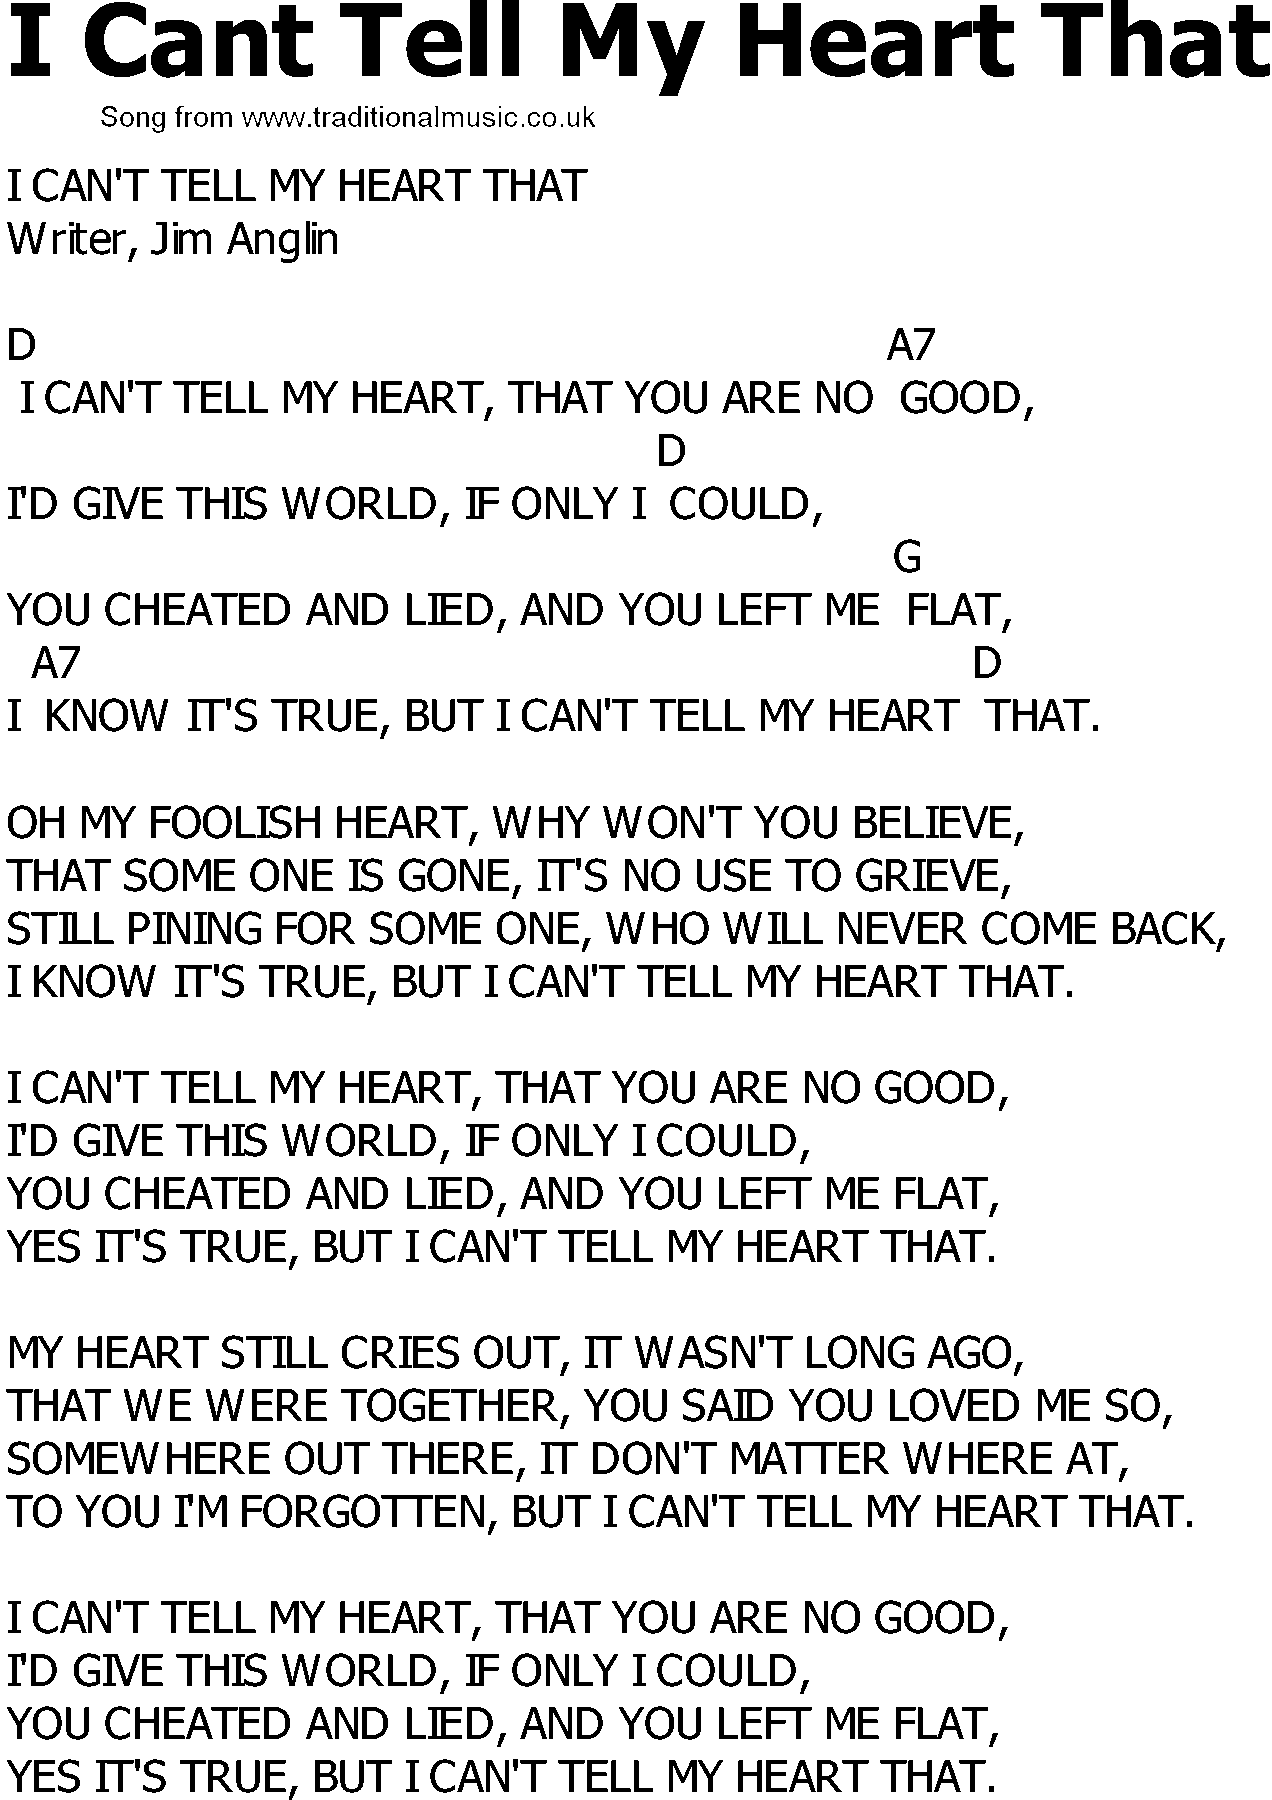 Old Country song lyrics with chords - I Cant Tell My Heart That